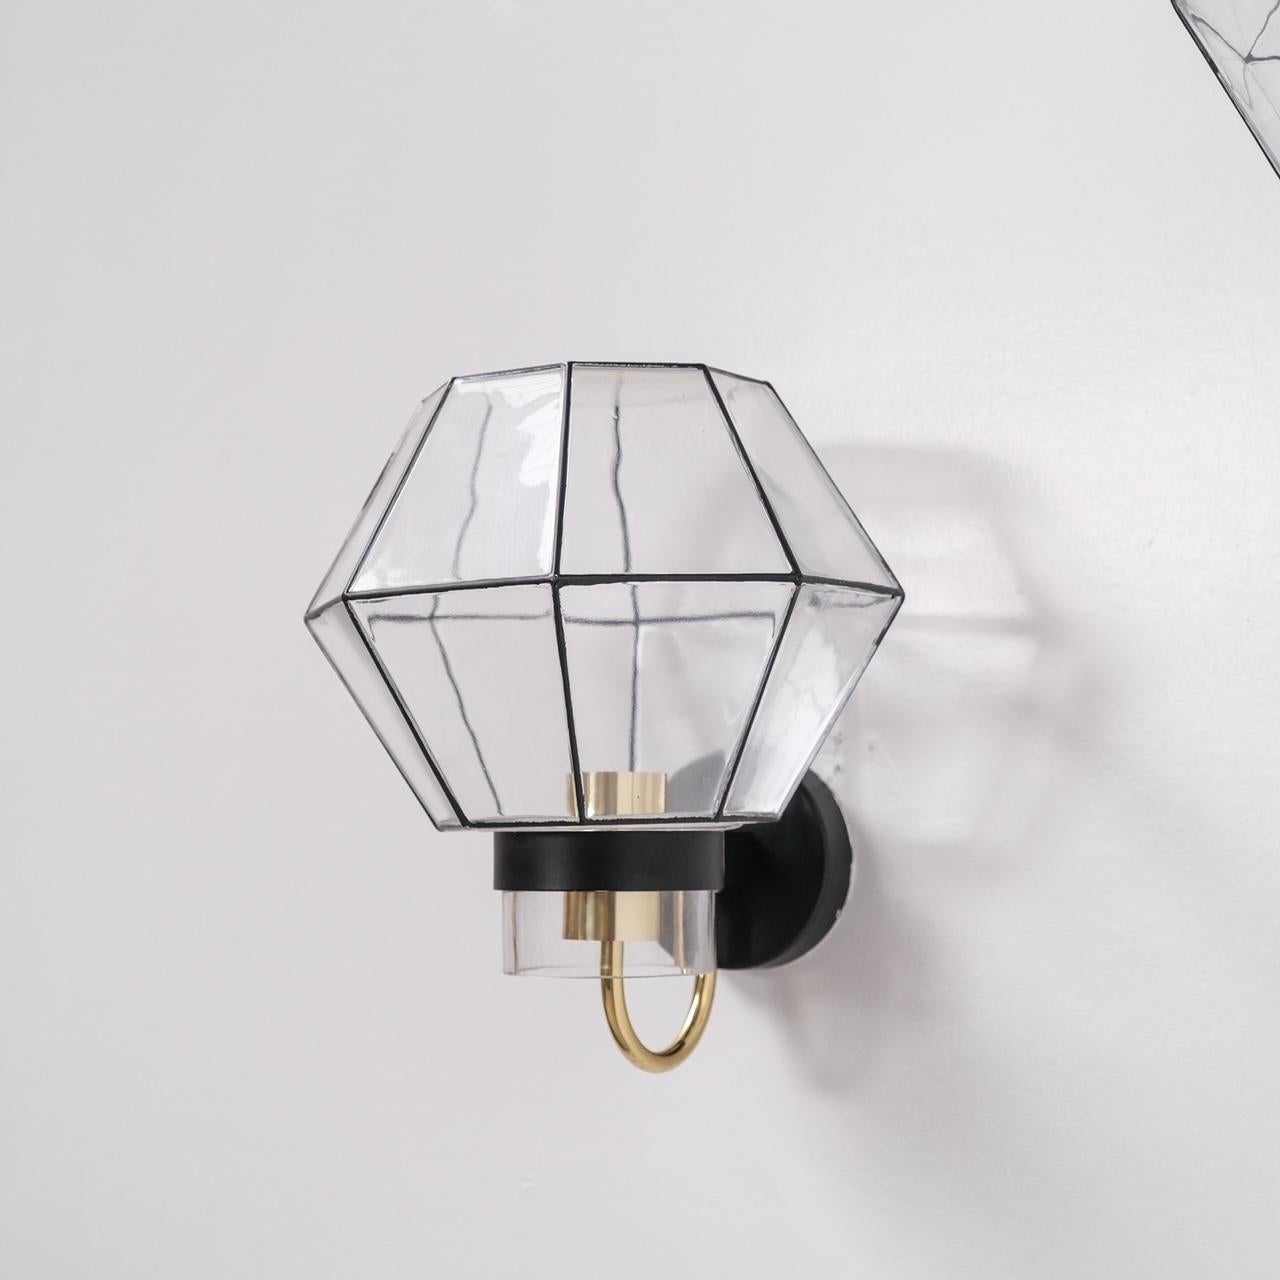 Pair of Midcentury Glass and Brass Wall Lights For Sale 2